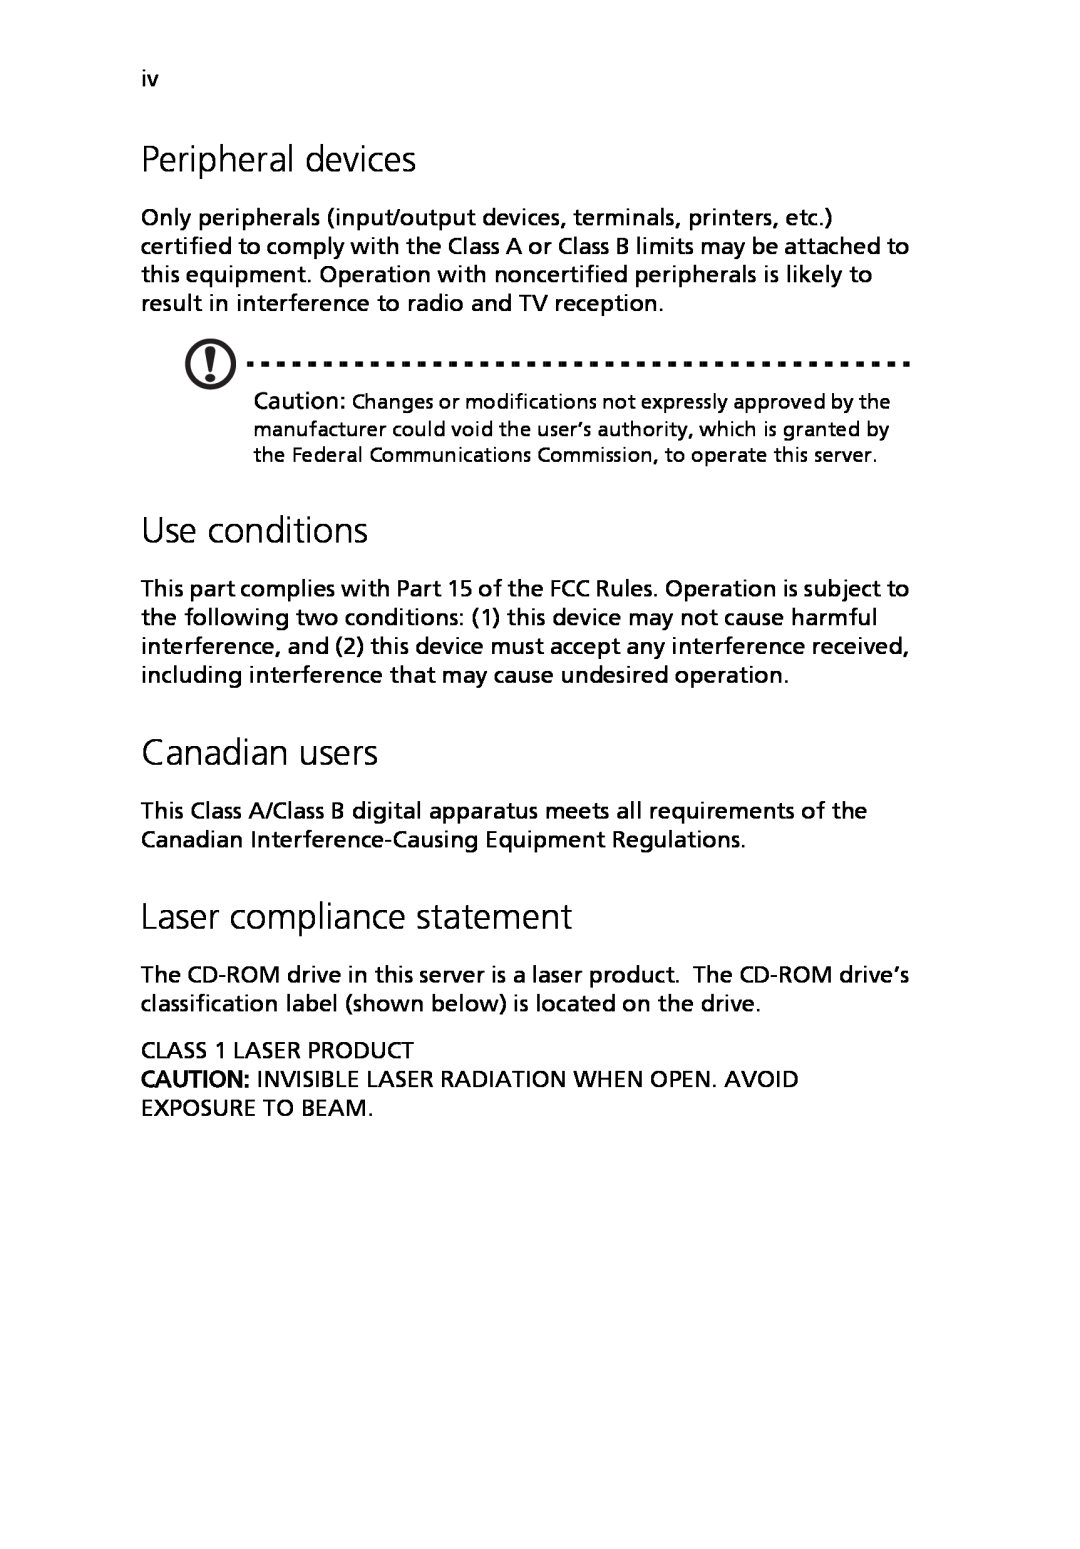 Acer Altos R710 manual Peripheral devices, Use conditions, Canadian users, Laser compliance statement 